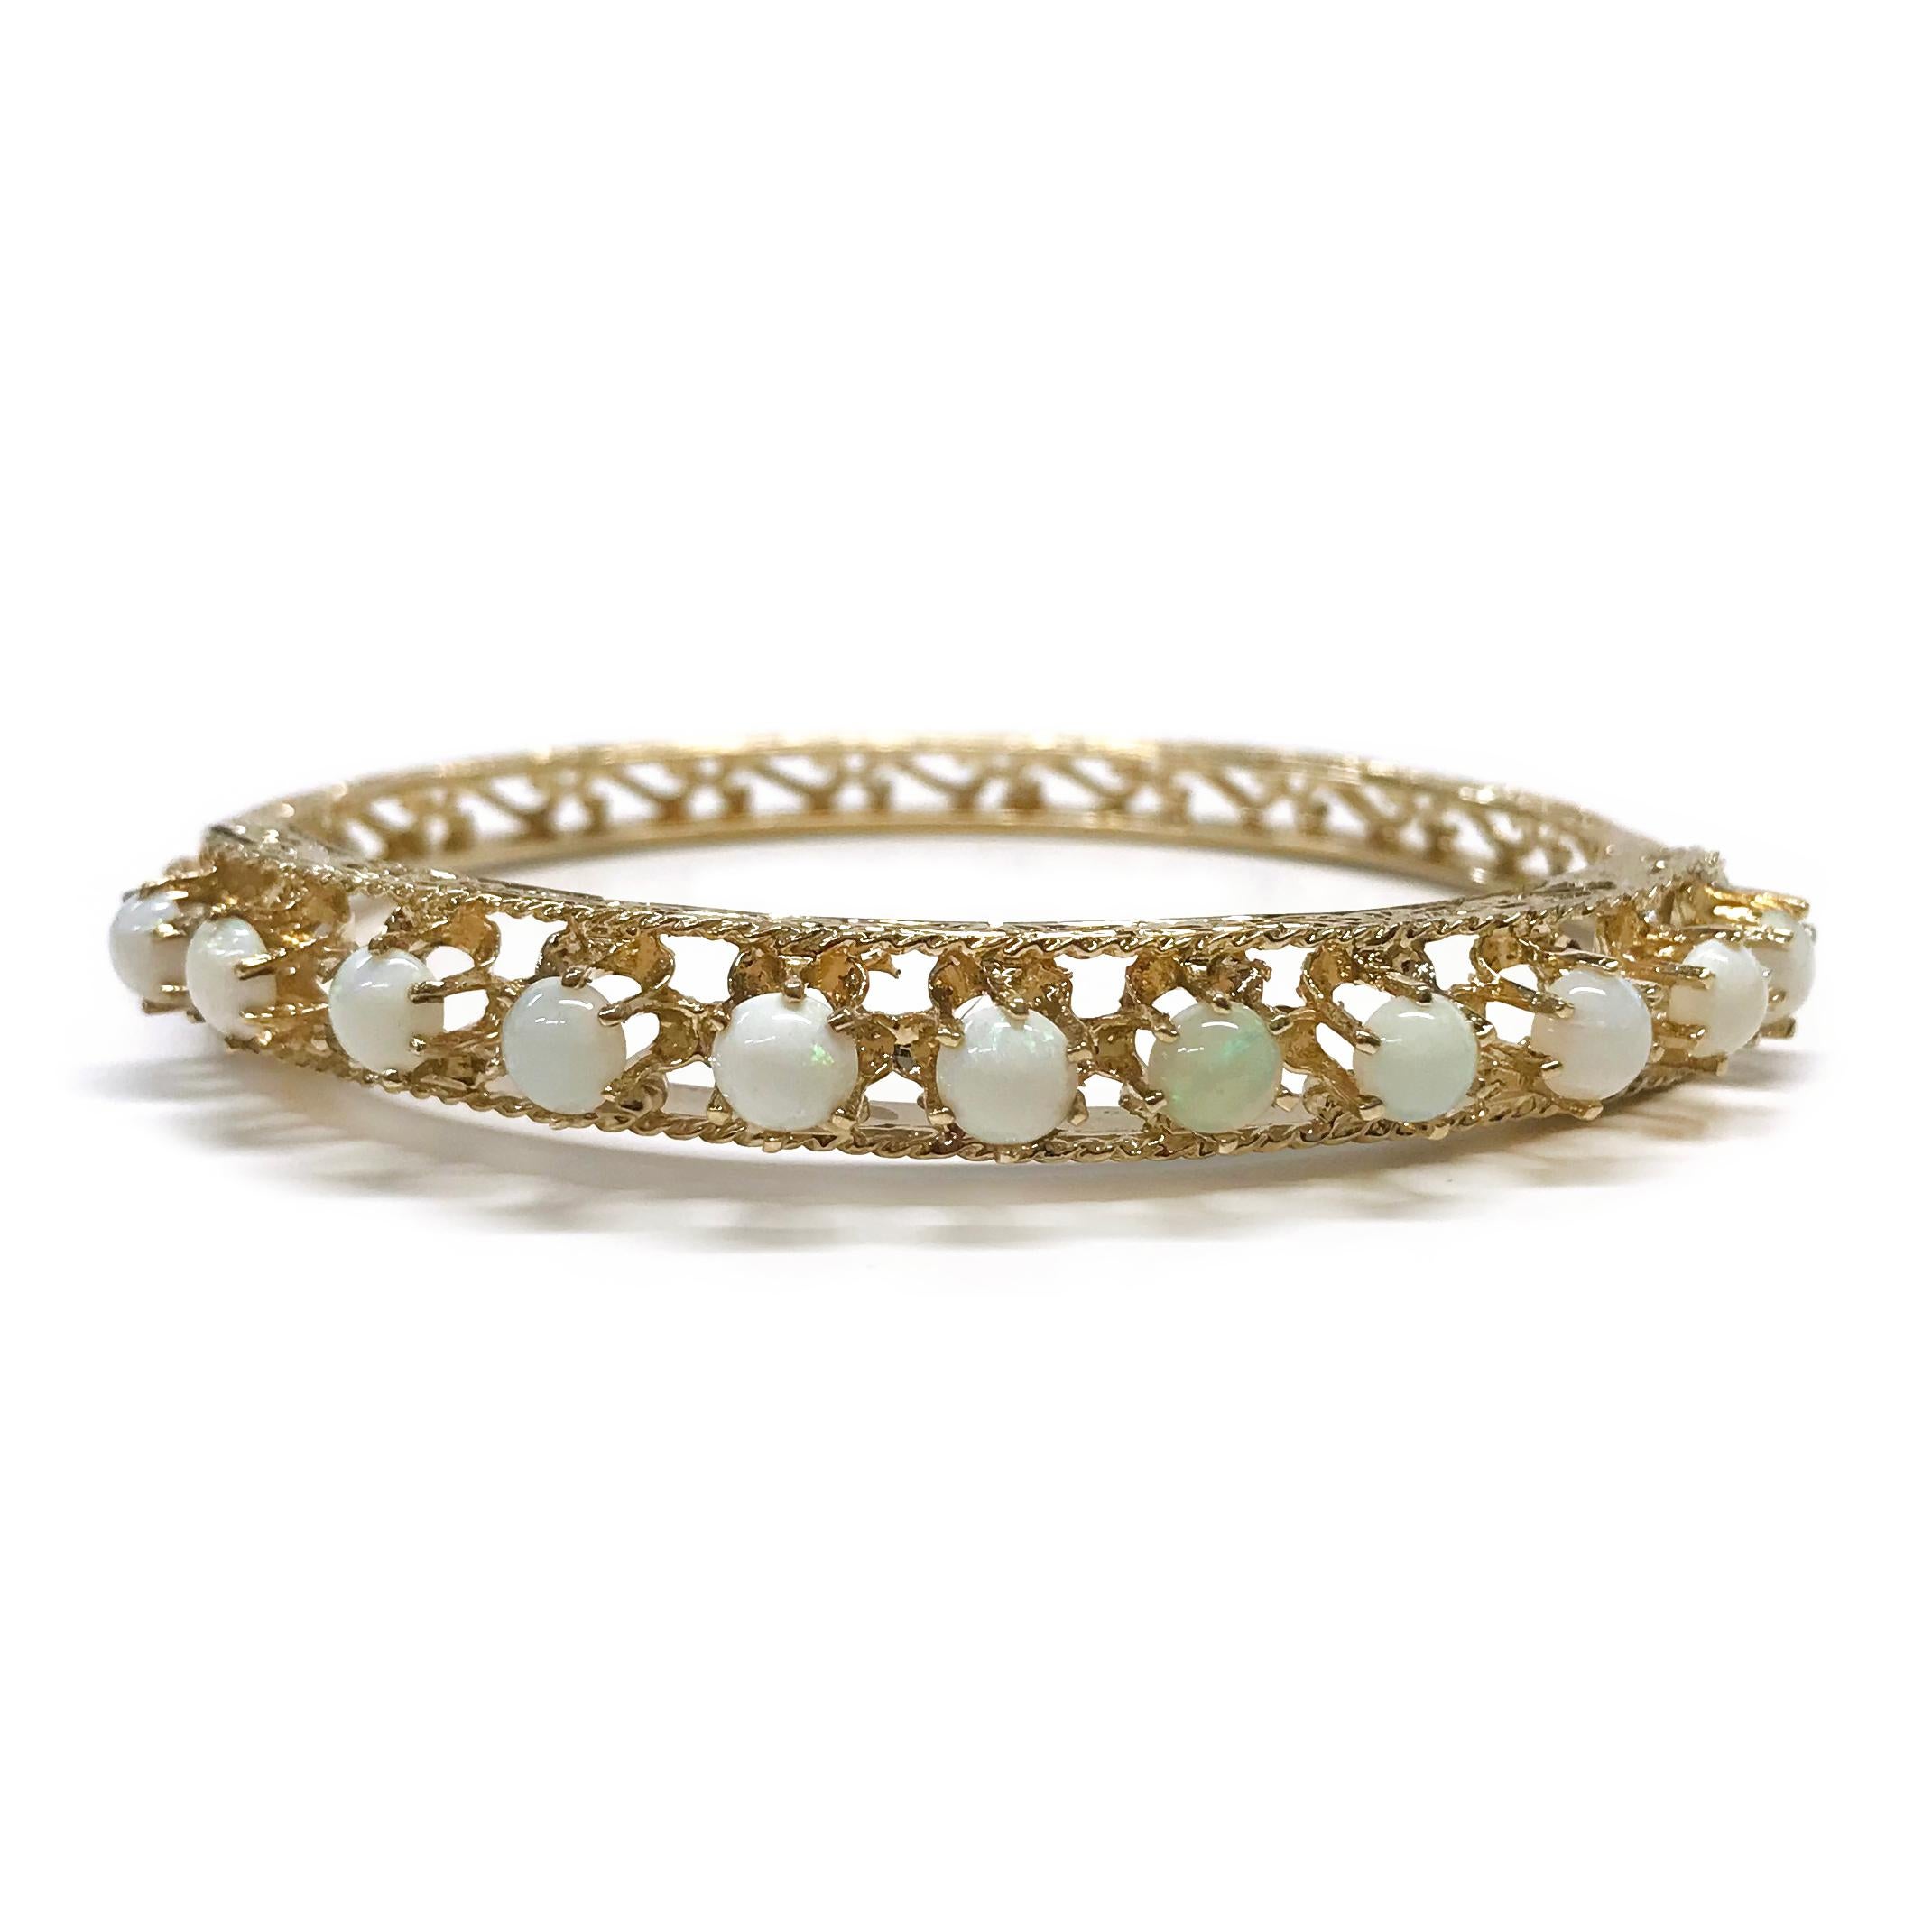 Antique 14 Karat Opal Bangle Bracelet. Eleven prong-set Opals adorn this lovely hinged bangle bracelet. The white Opals have a play of color in green and pinkish-red. There is substantial detail in this piece, making it extra special with cutout